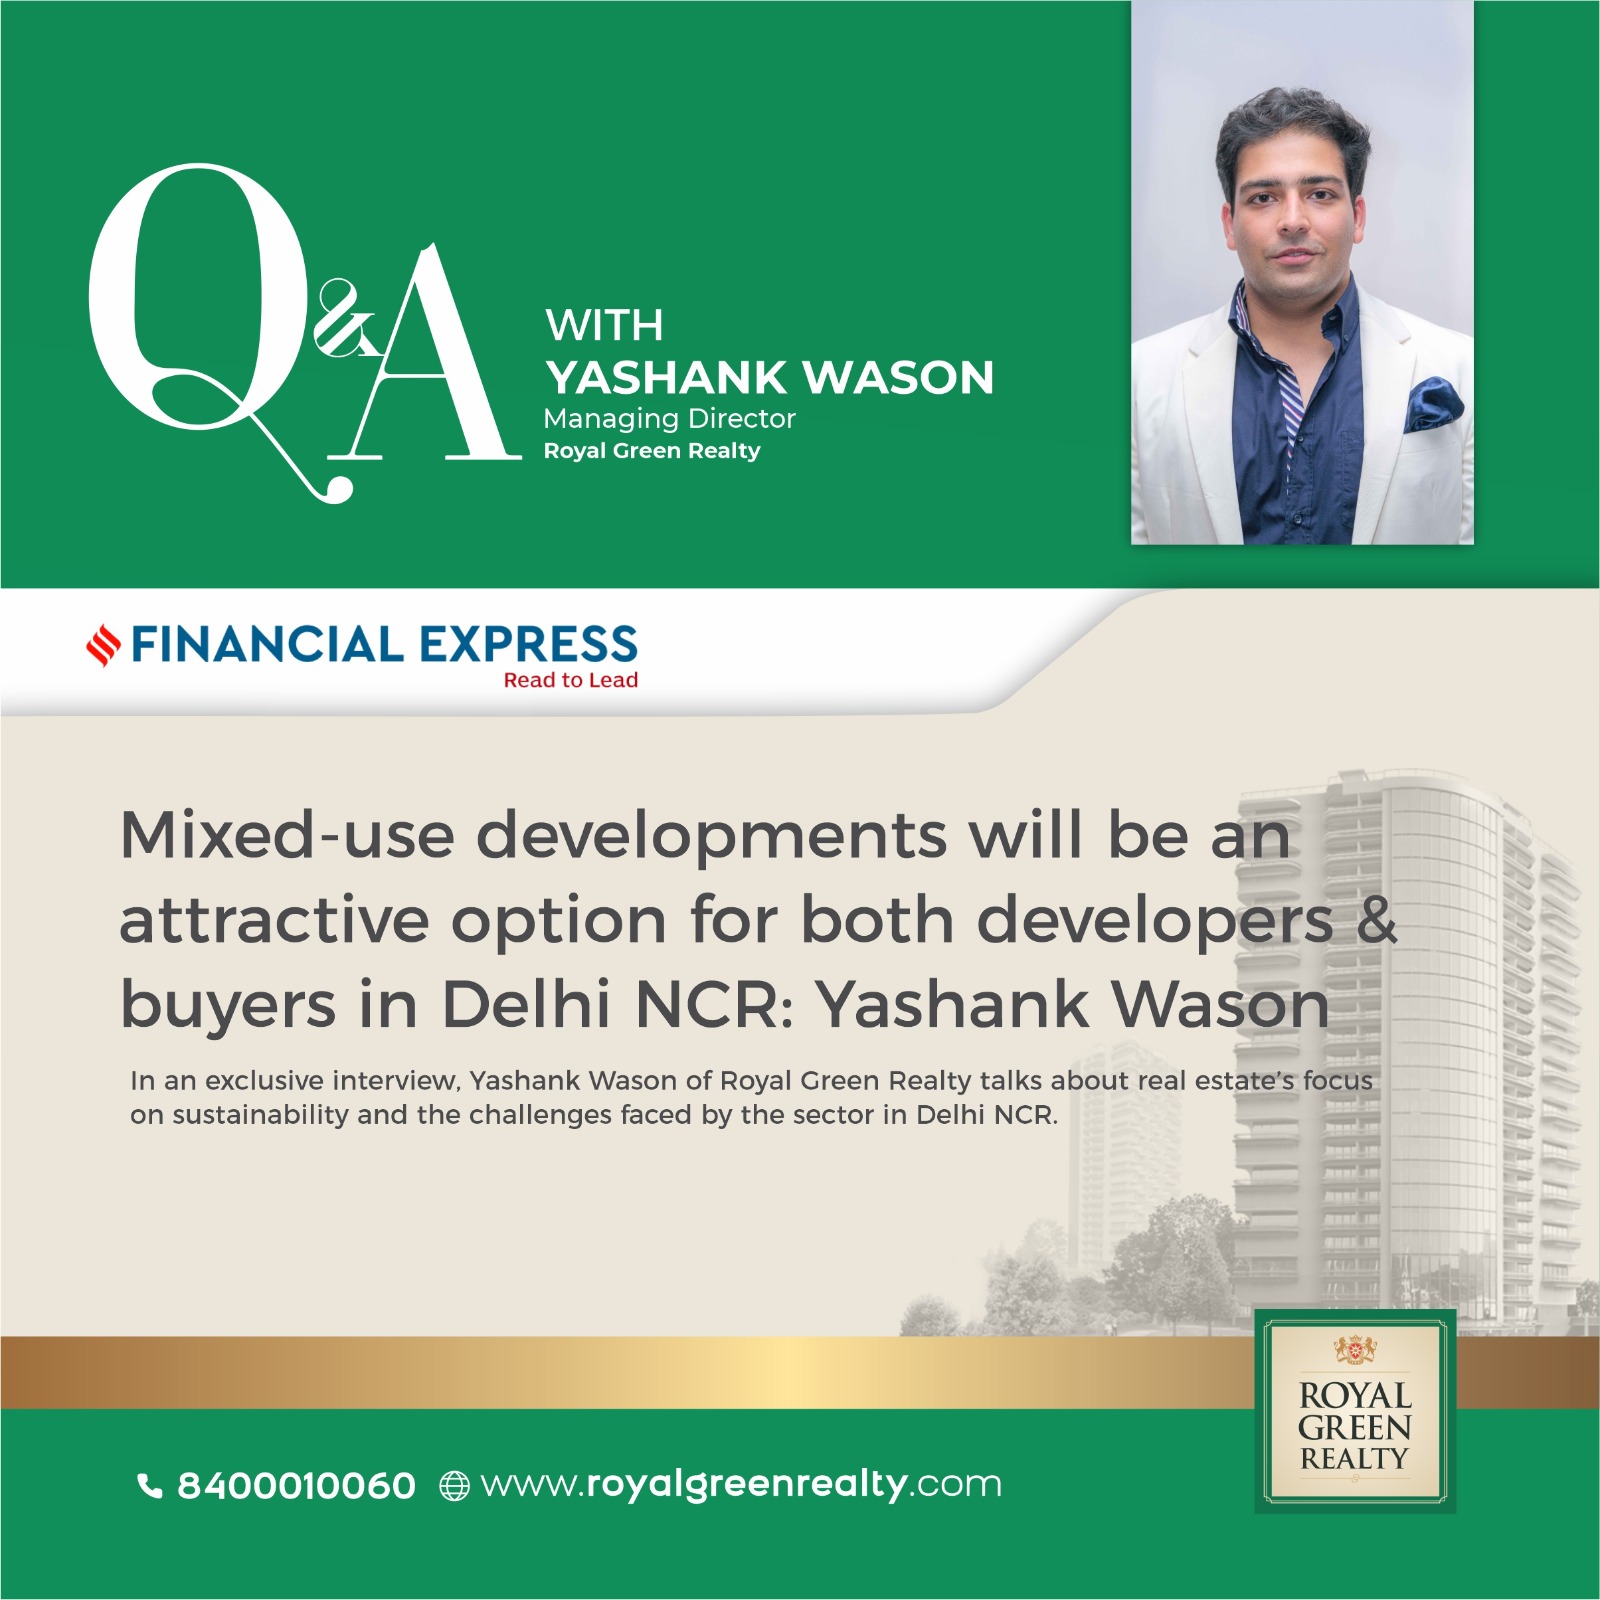 Mixed-use developments will be an attactive option for both developers & buyers in Delhi NCR: Yashank Wason